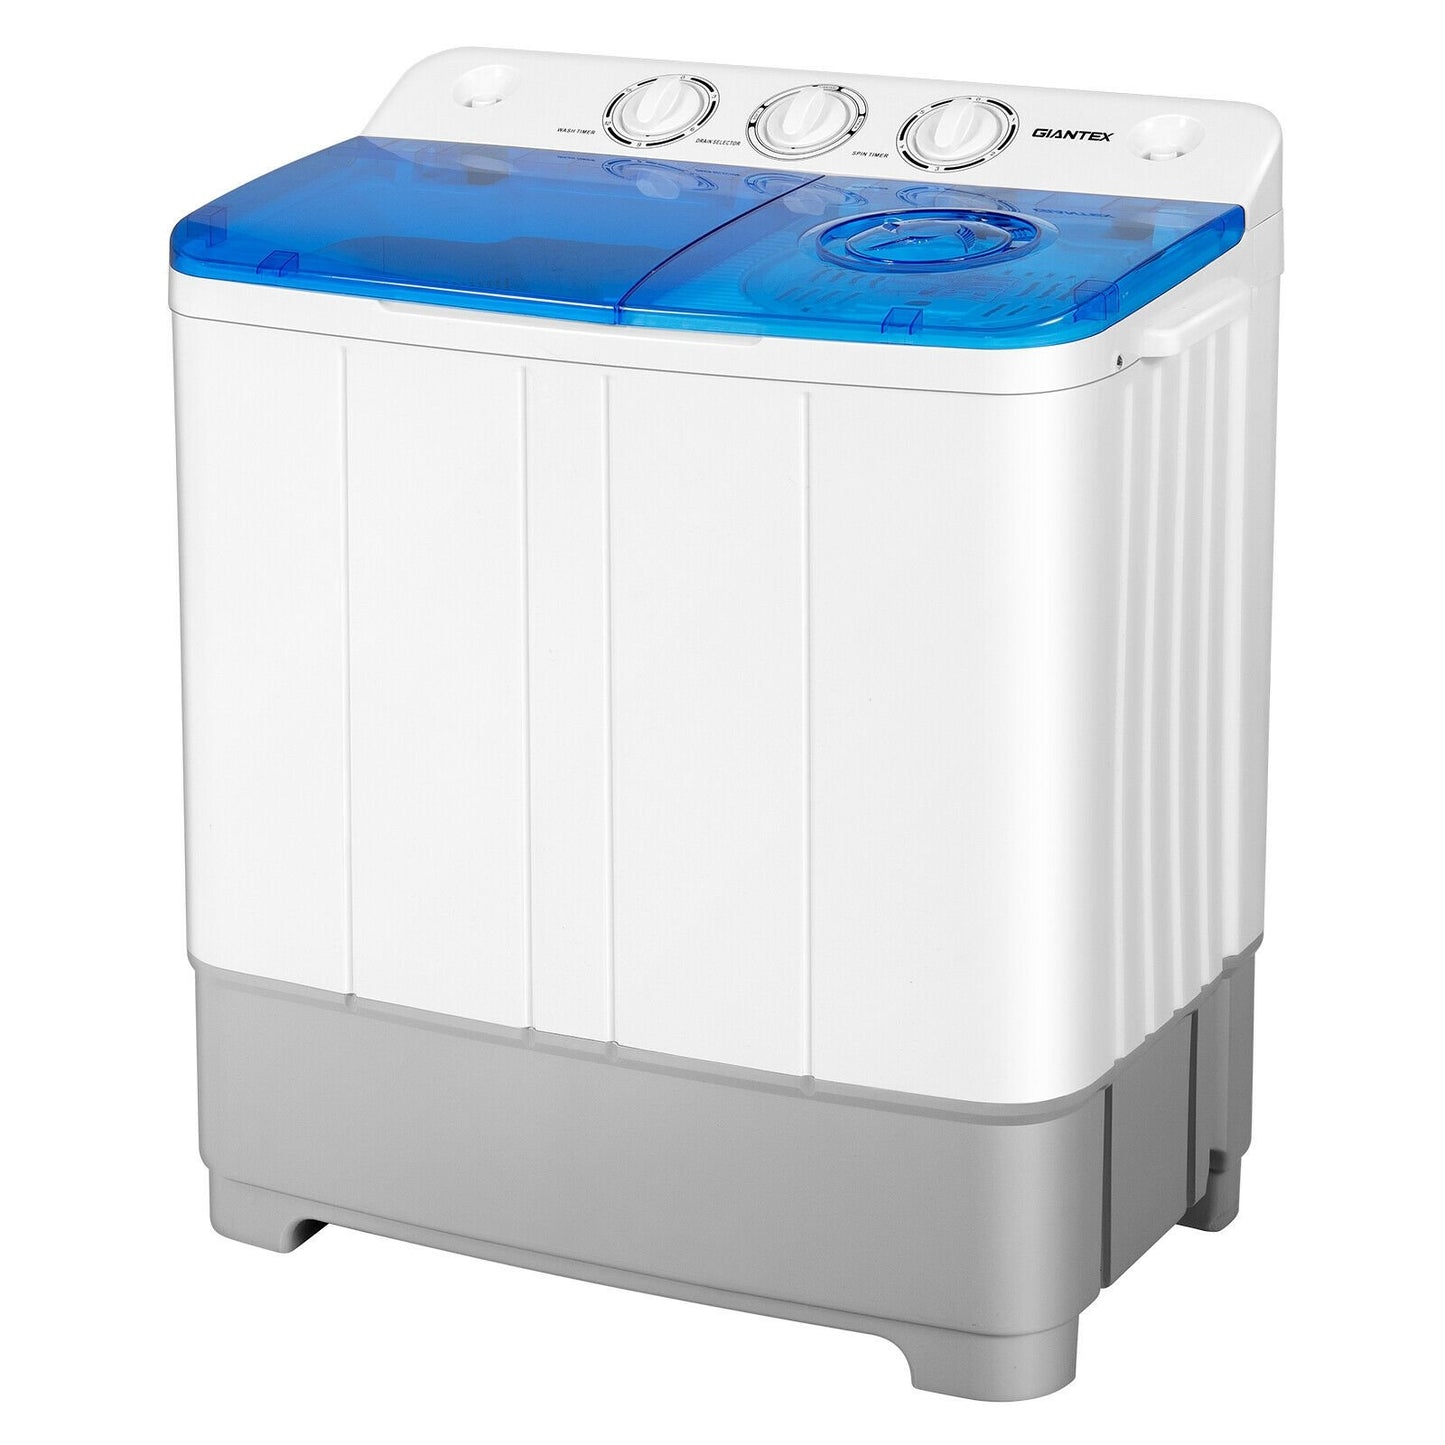 2-in-1 Portable 22lbs Capacity Washing Machine with Timer Control, Blue